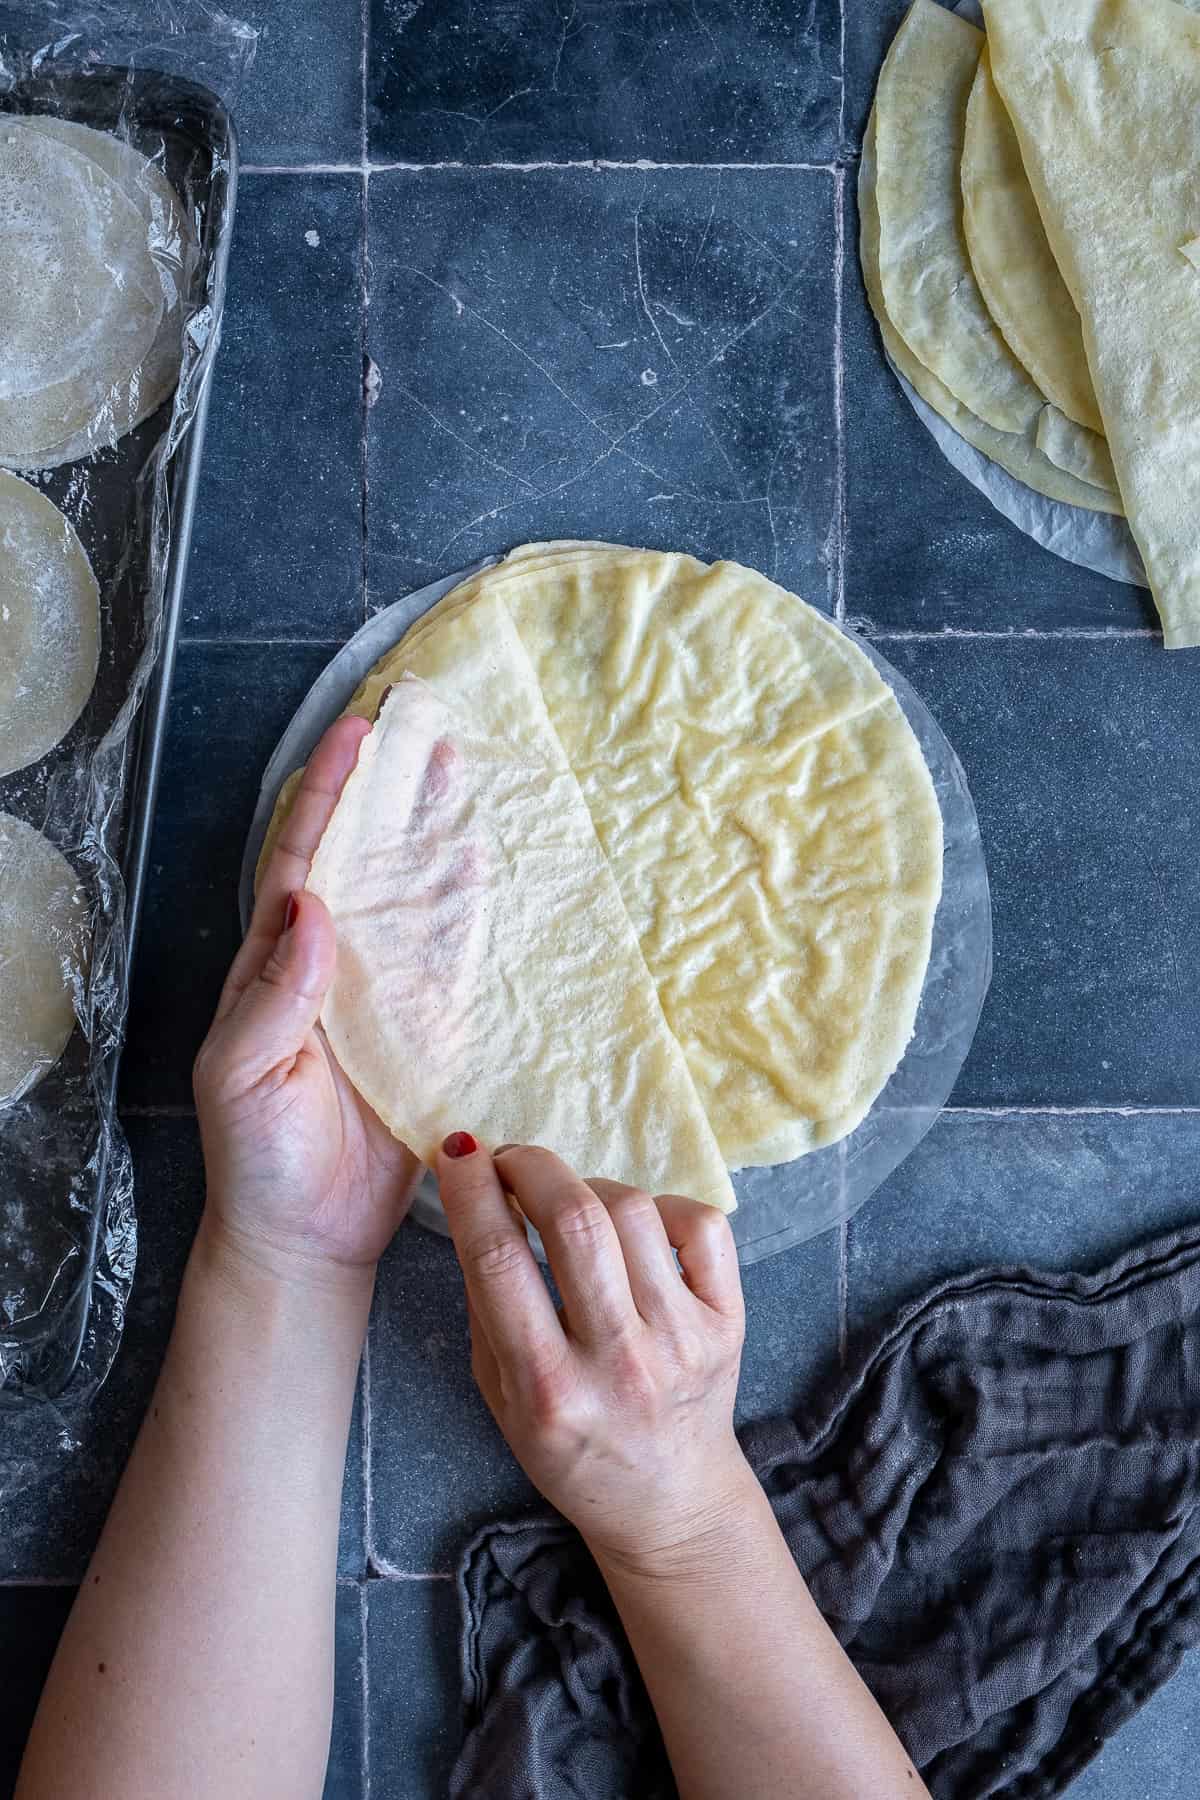 Hands separating a phyllo sheet from a stack on a grey marble background.